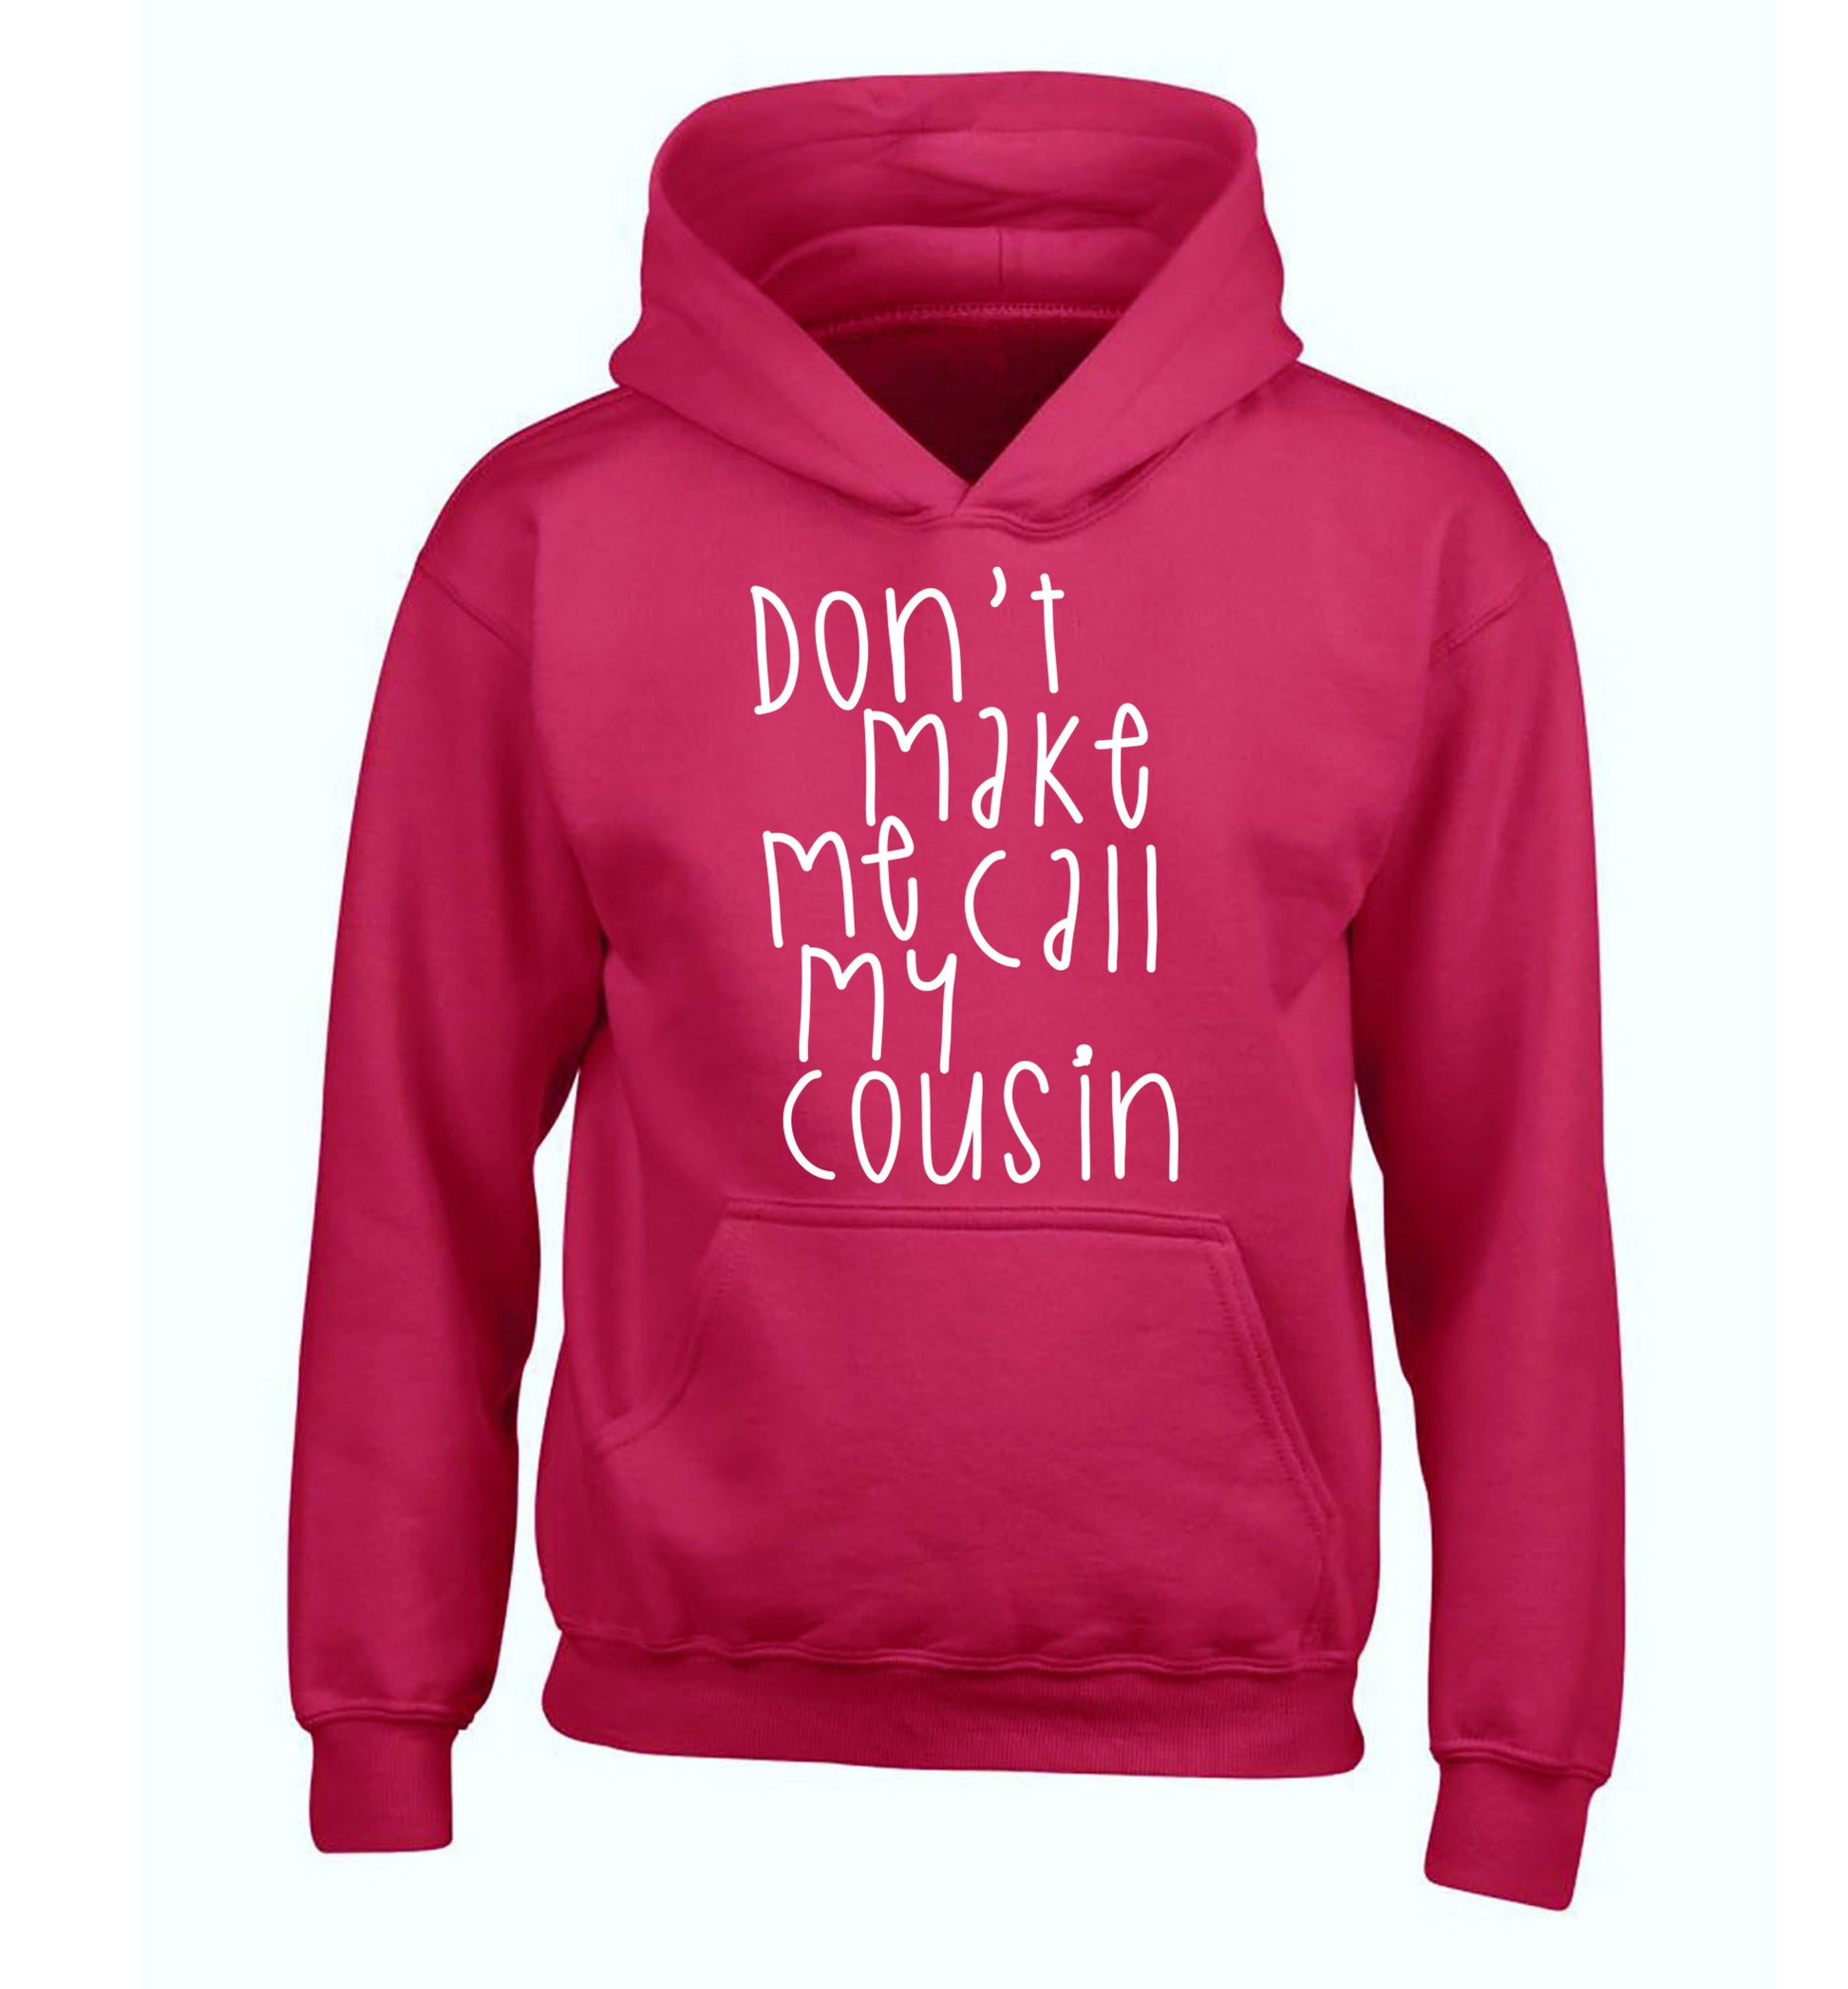 Don't make me call my cousin children's pink hoodie 12-14 Years